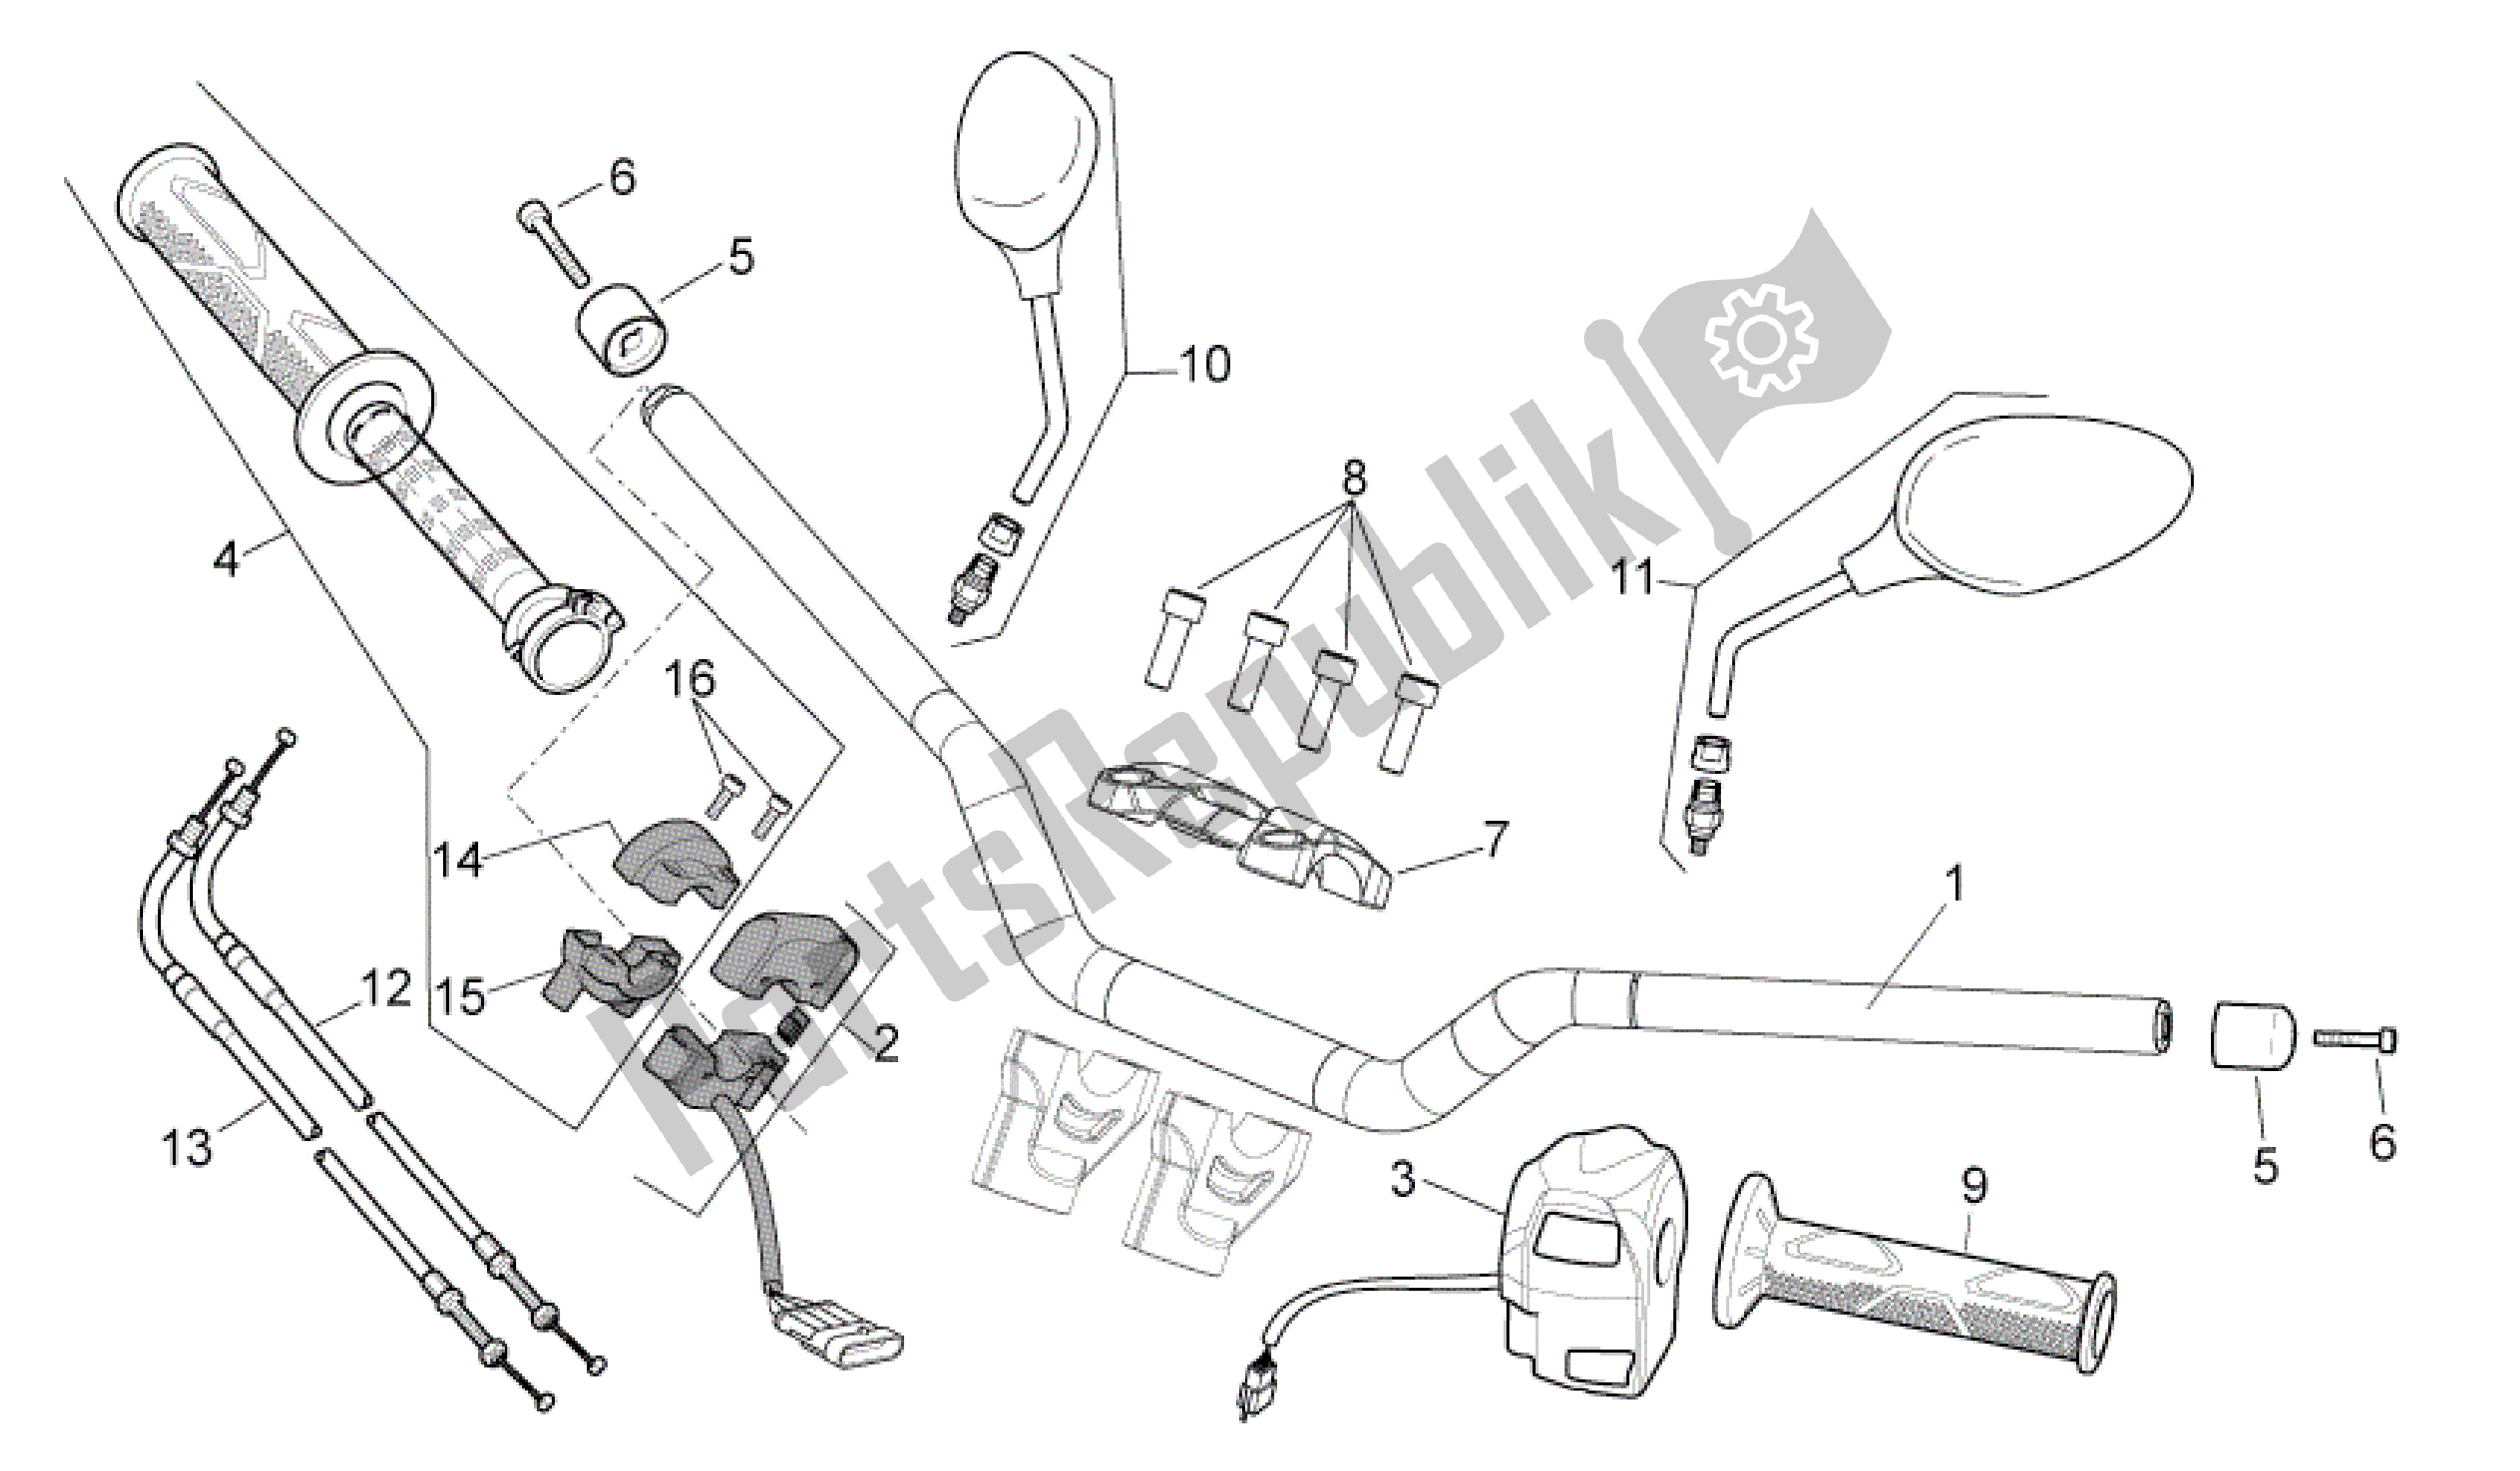 All parts for the Handlebar - Controls of the Aprilia Shiver 750 2011 - 2013